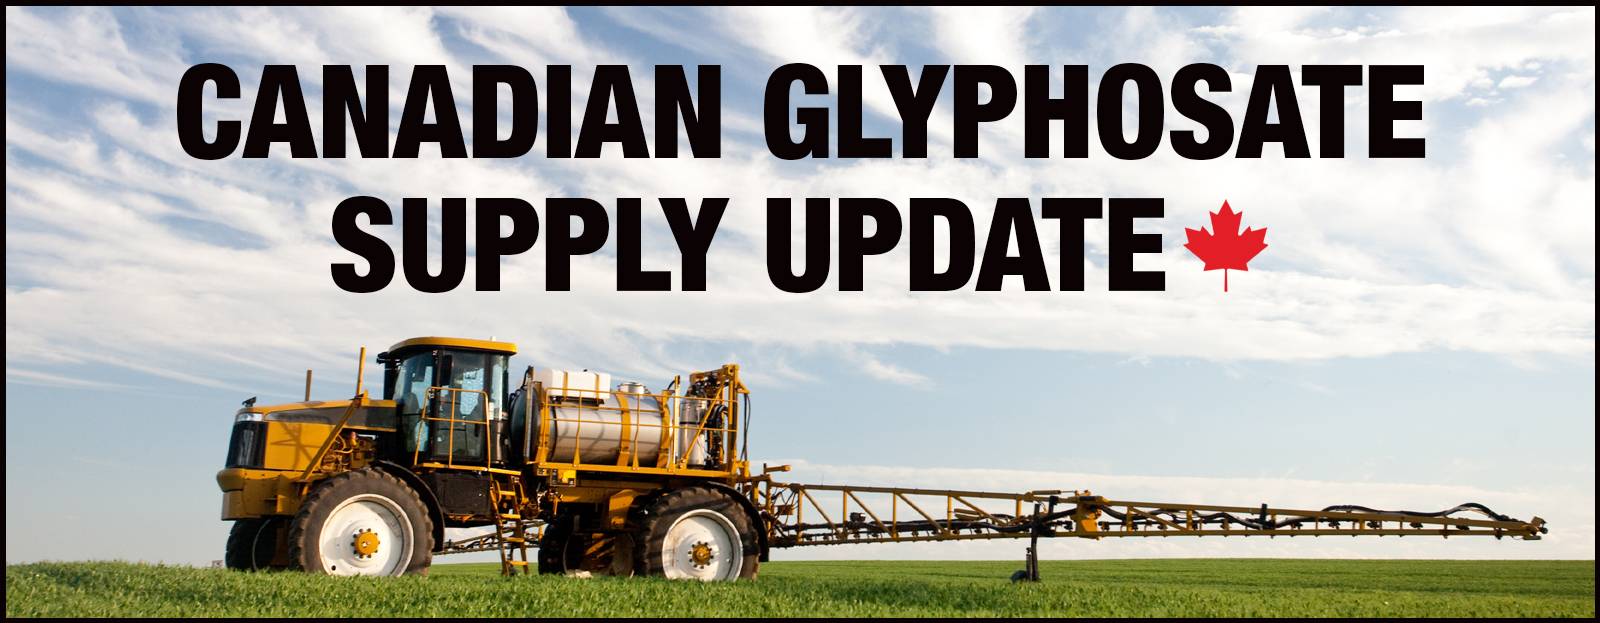 Bayer CropScience Update on Canadian Glyphosate Supply